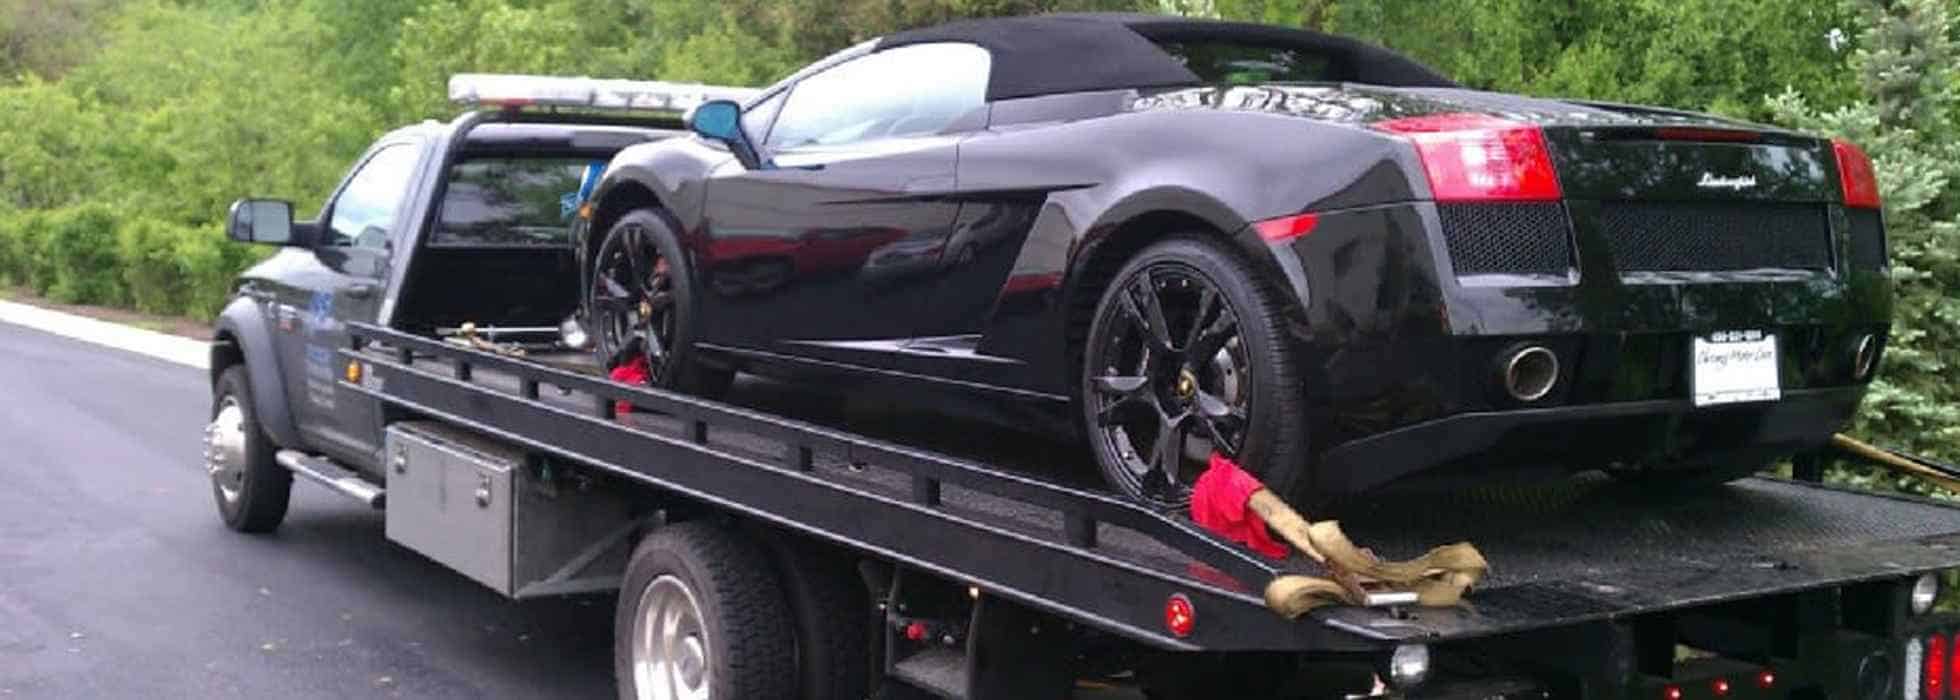 Get Your Vehicle Serviced From a Superlative Towing Company